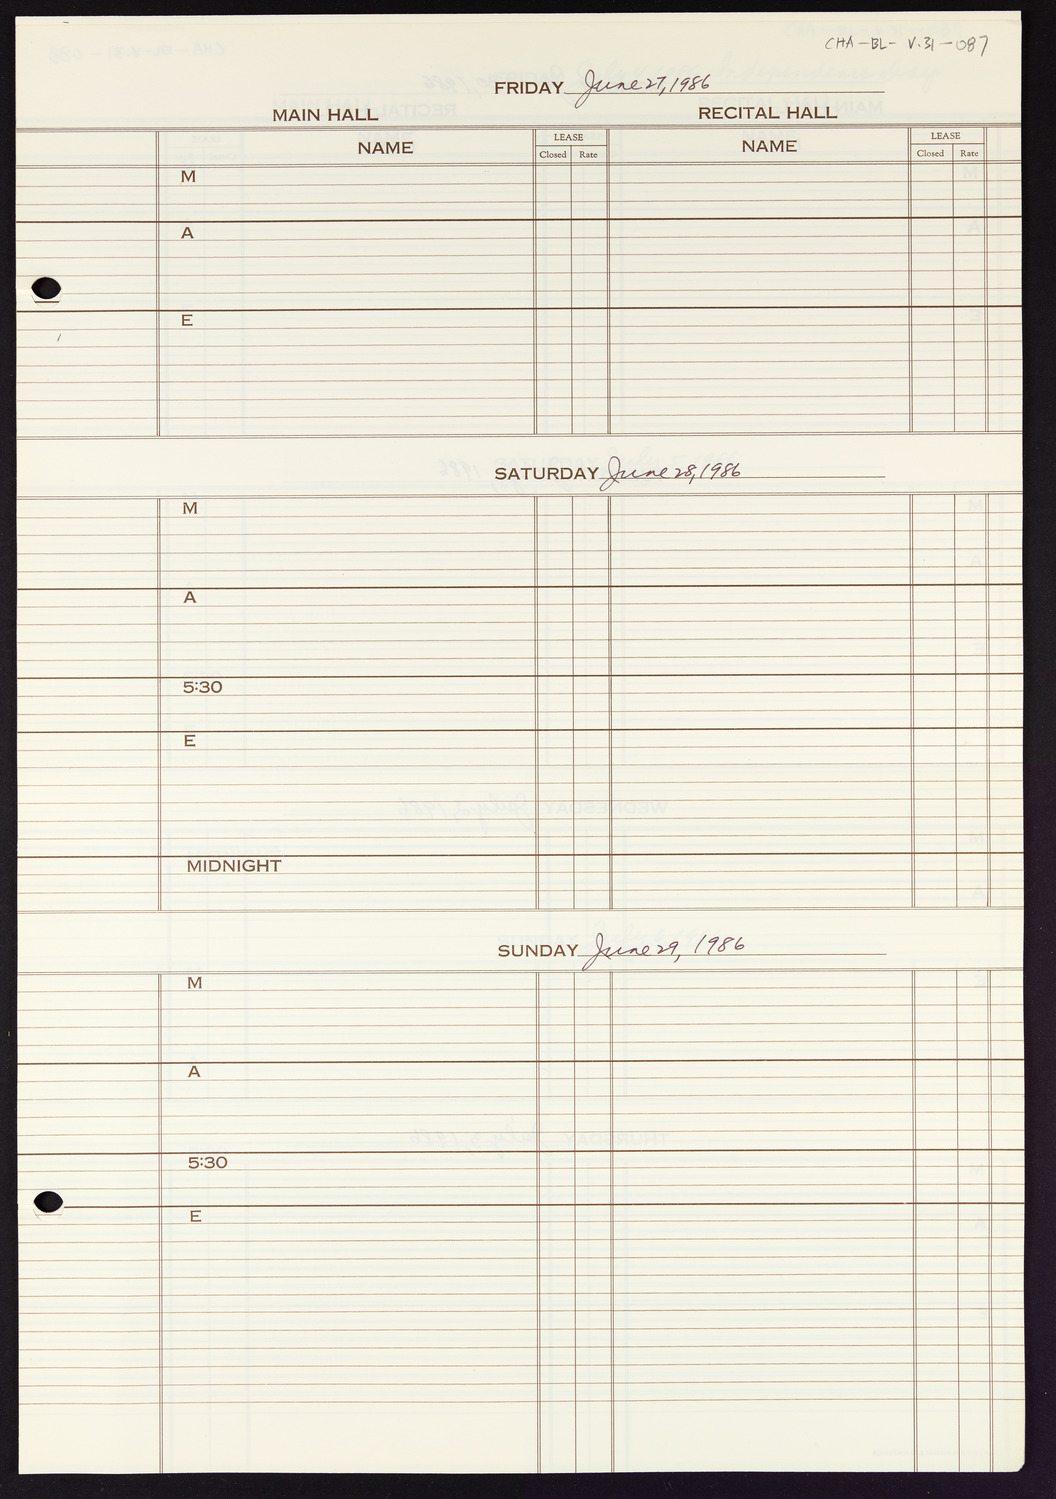 Carnegie Hall Booking Ledger, volume 31, page 87